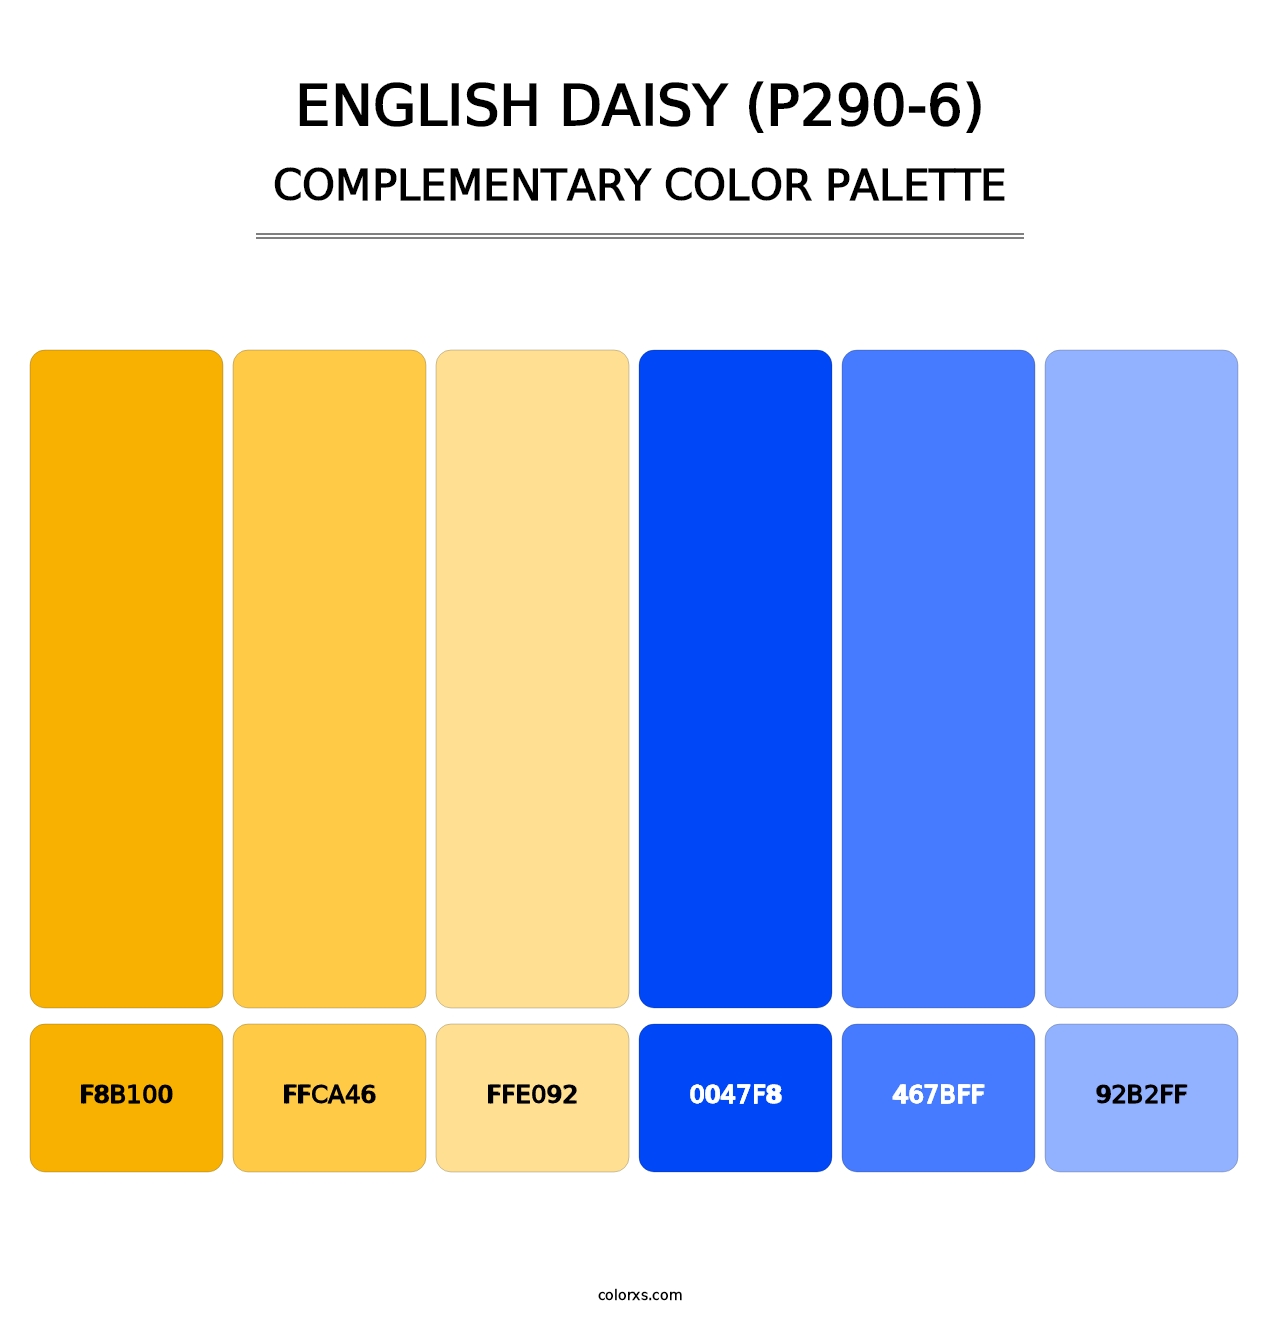 English Daisy (P290-6) - Complementary Color Palette